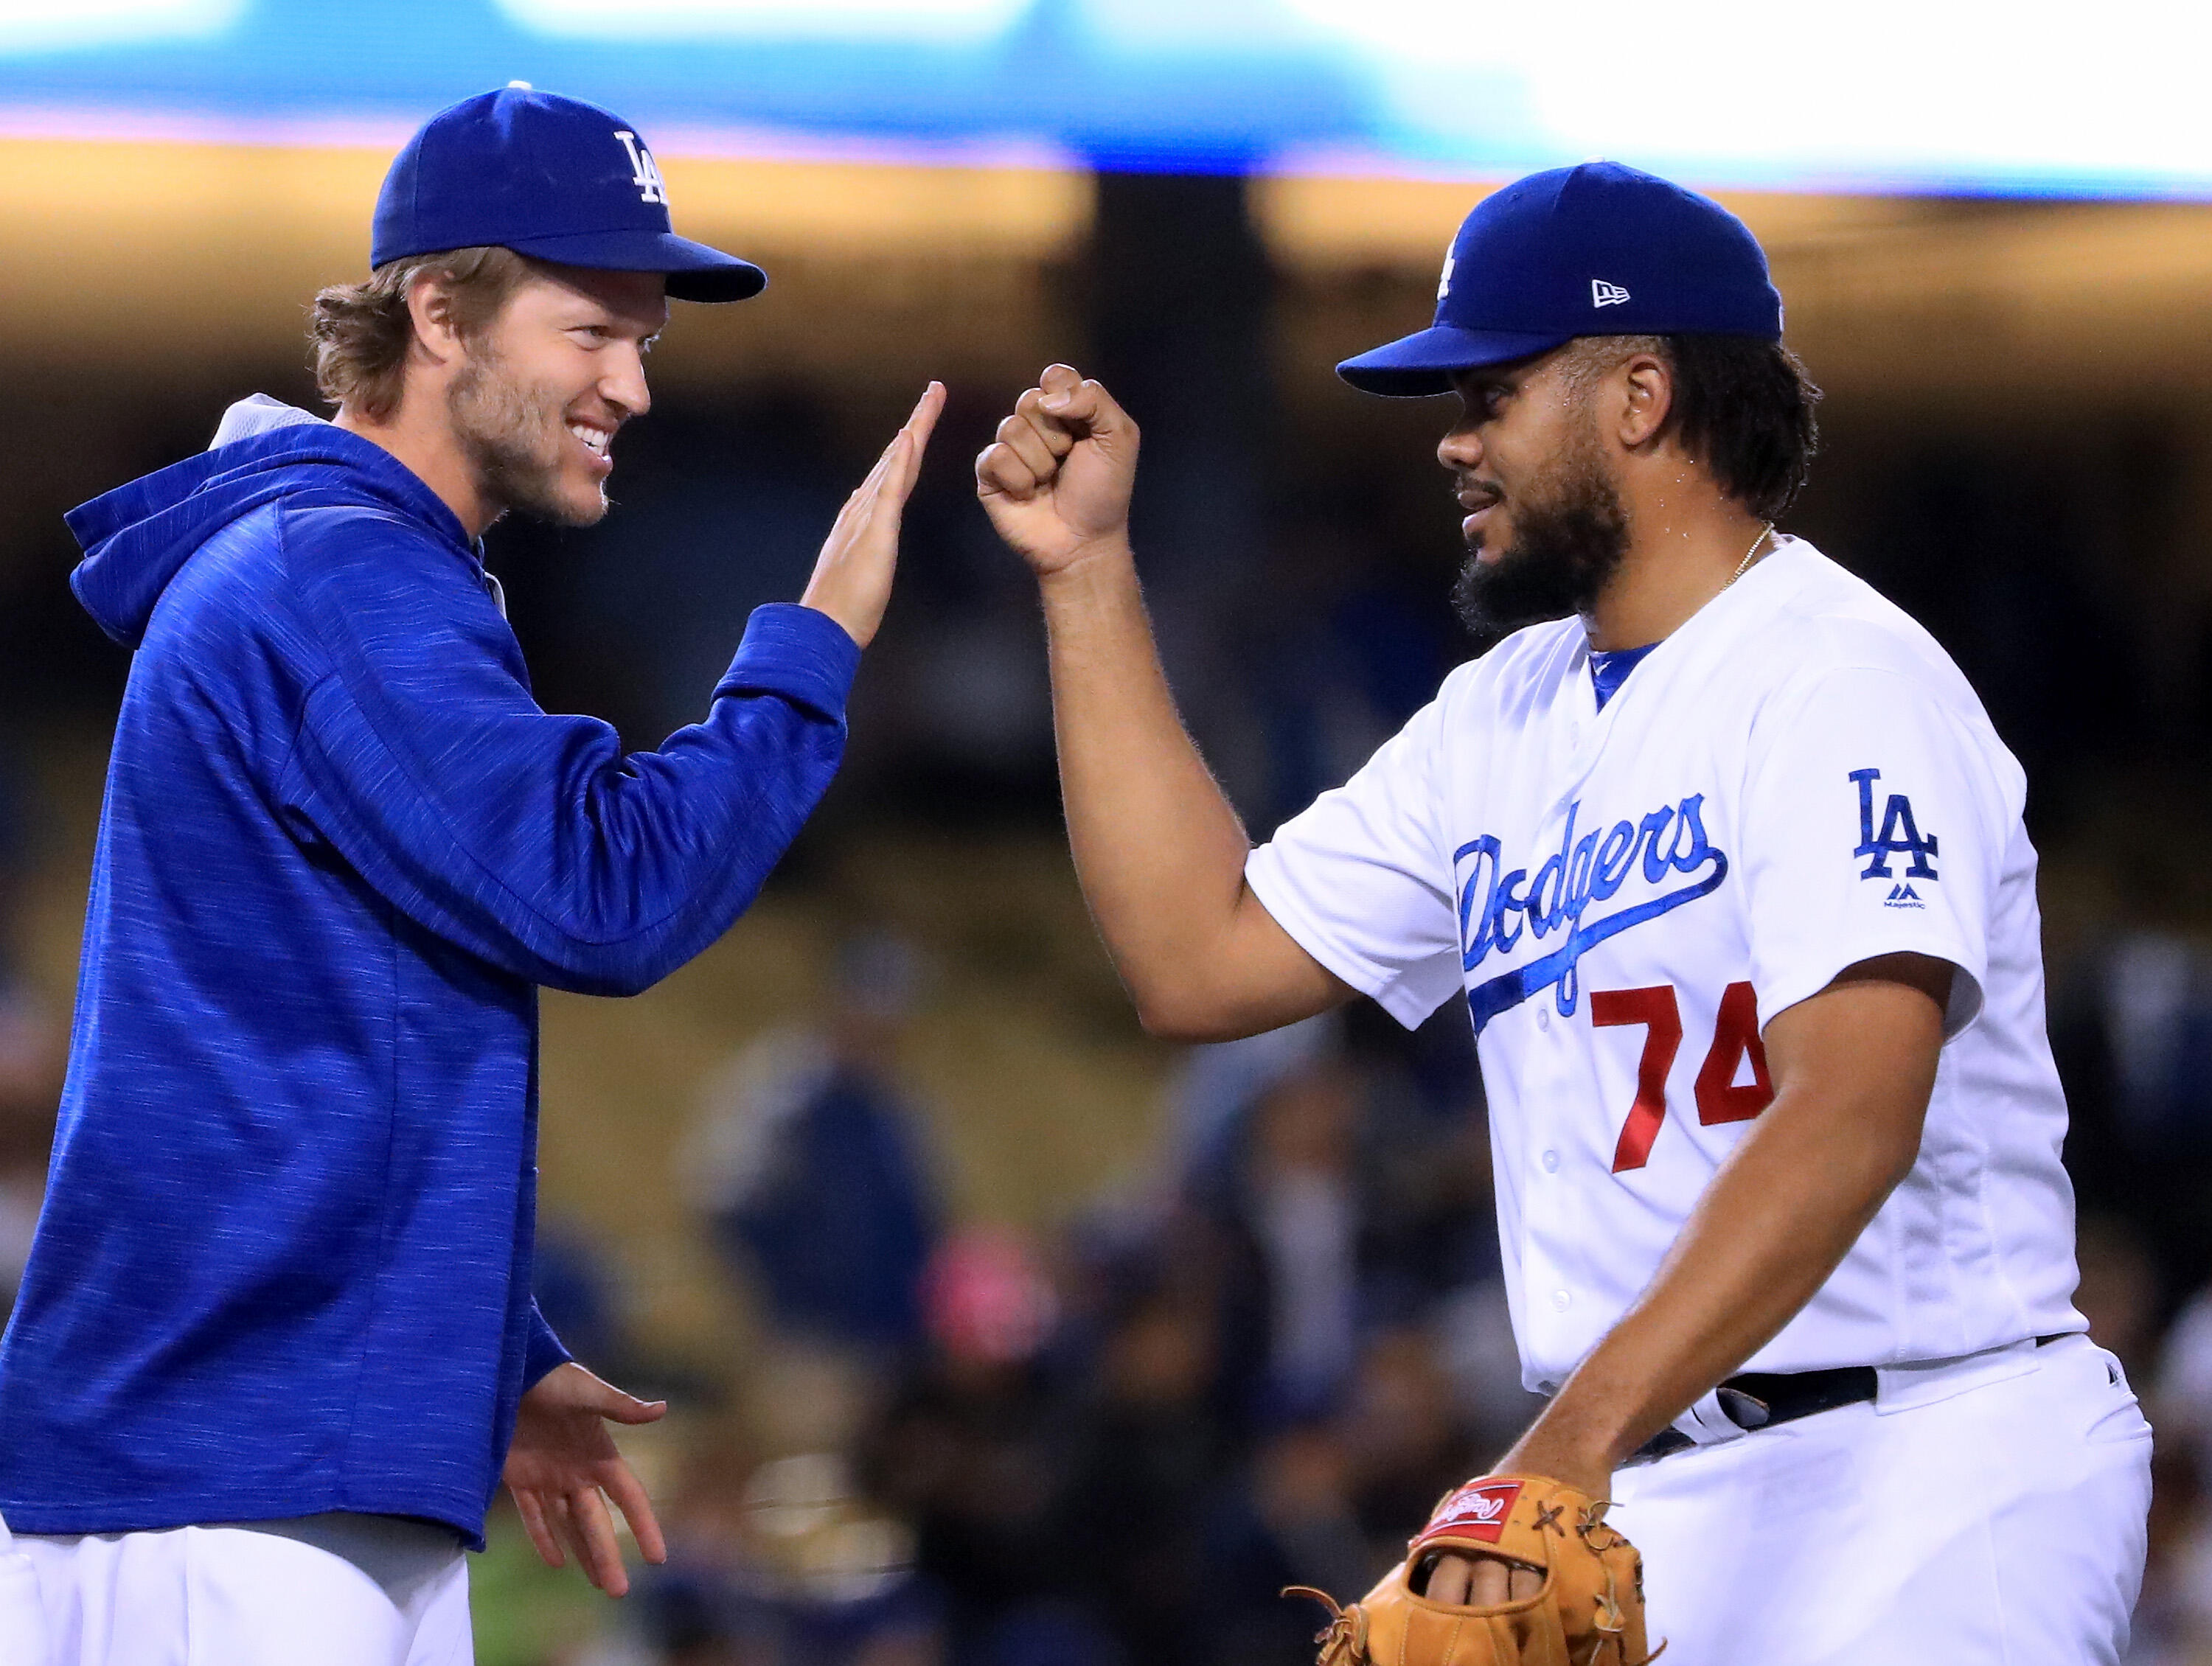 LOS ANGELES, CA - MAY 18:  Kenley Jansen #74 of the Los Angeles Dodgers celebrates a save and a 7-2 win over the Miami Marlins with Clayton Kershaw #22 at Dodger Stadium on May 18, 2017 in Los Angeles, California.  (Photo by Harry How/Getty Images)